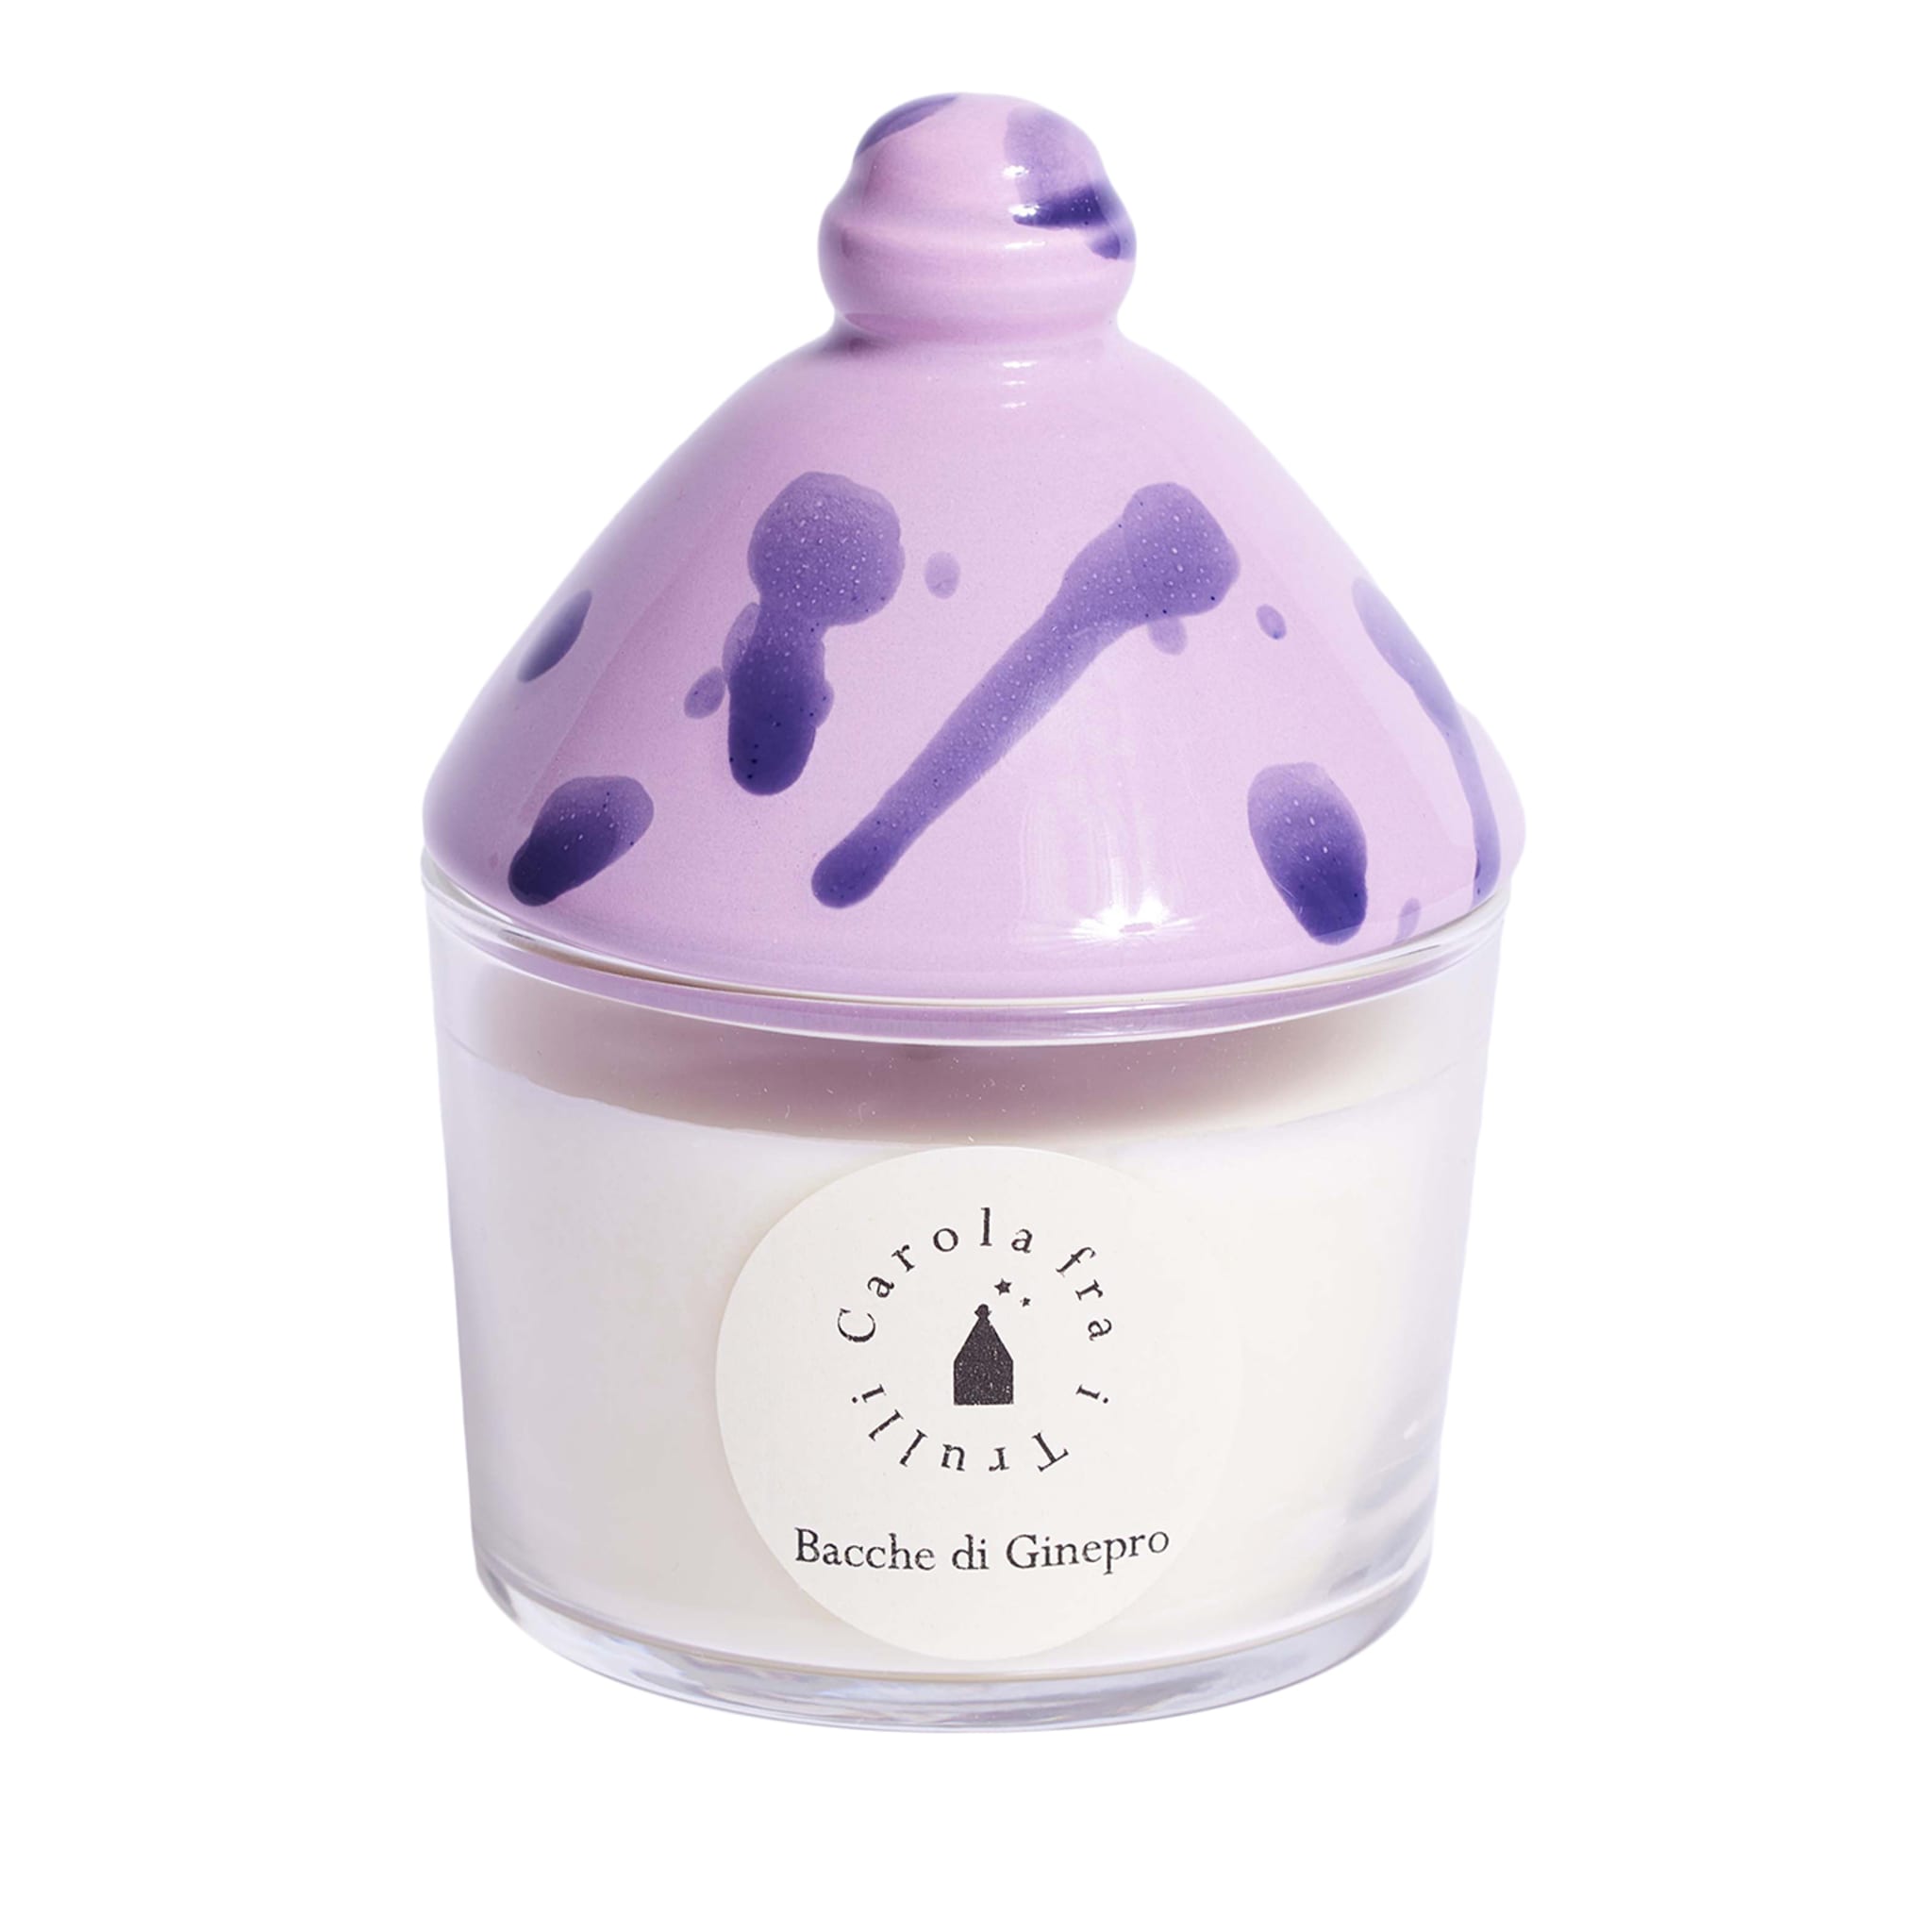 Bacche di Ginepro ScentedCandle with Ceramic Lid - Main view